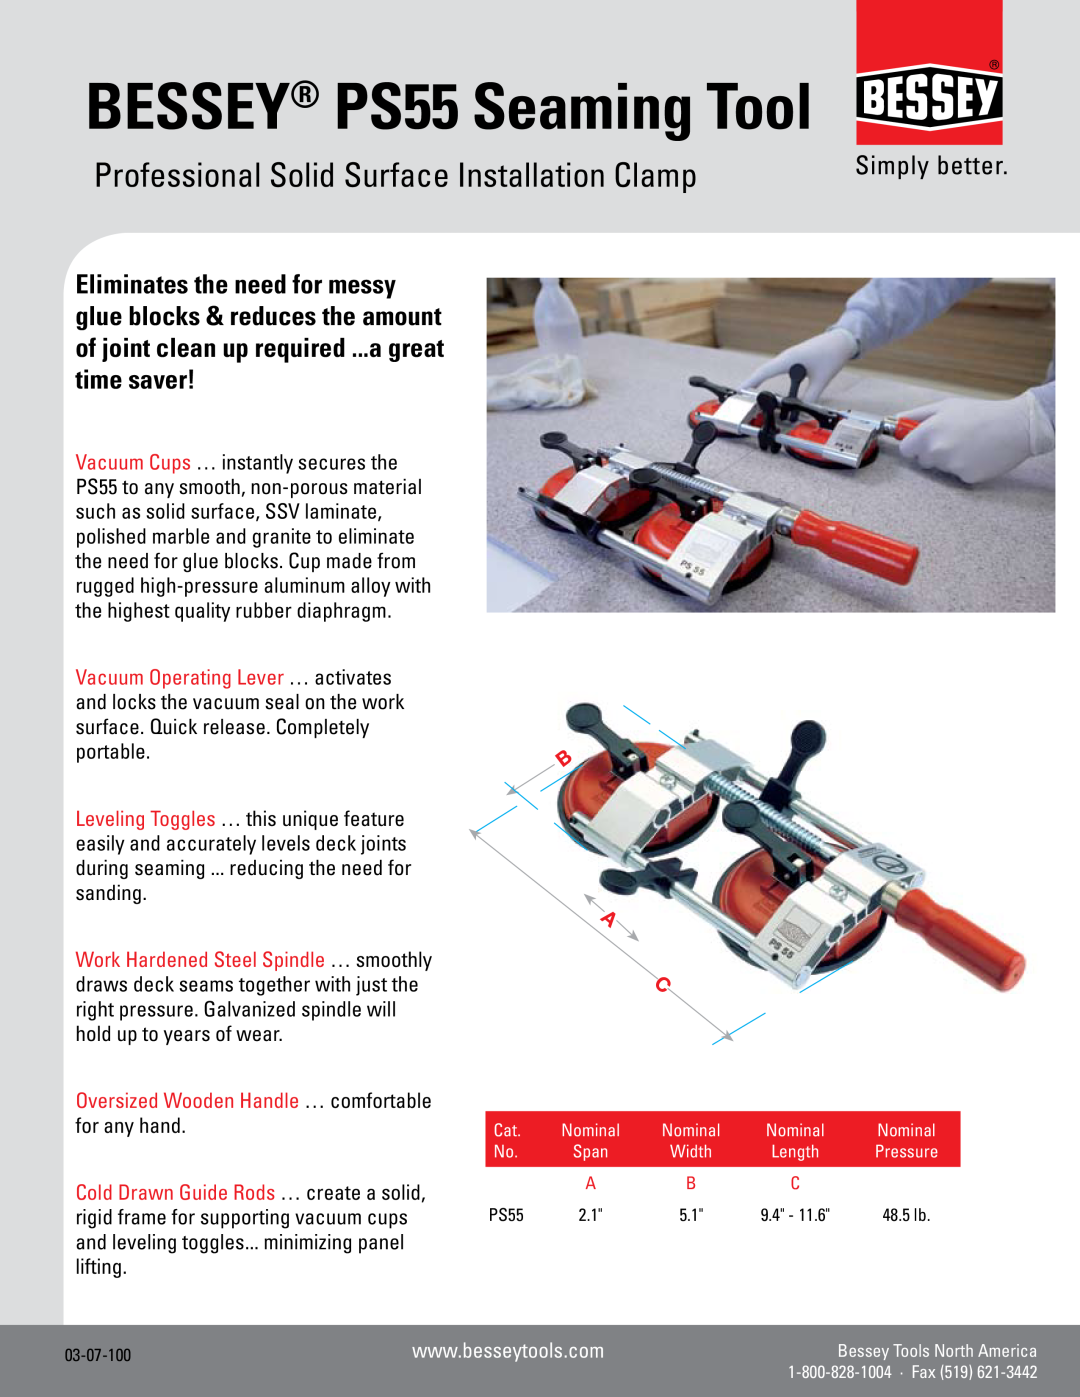 Bessey manual BESSEY PS55 Seaming Tool, Professional Solid Surface Installation Clamp 